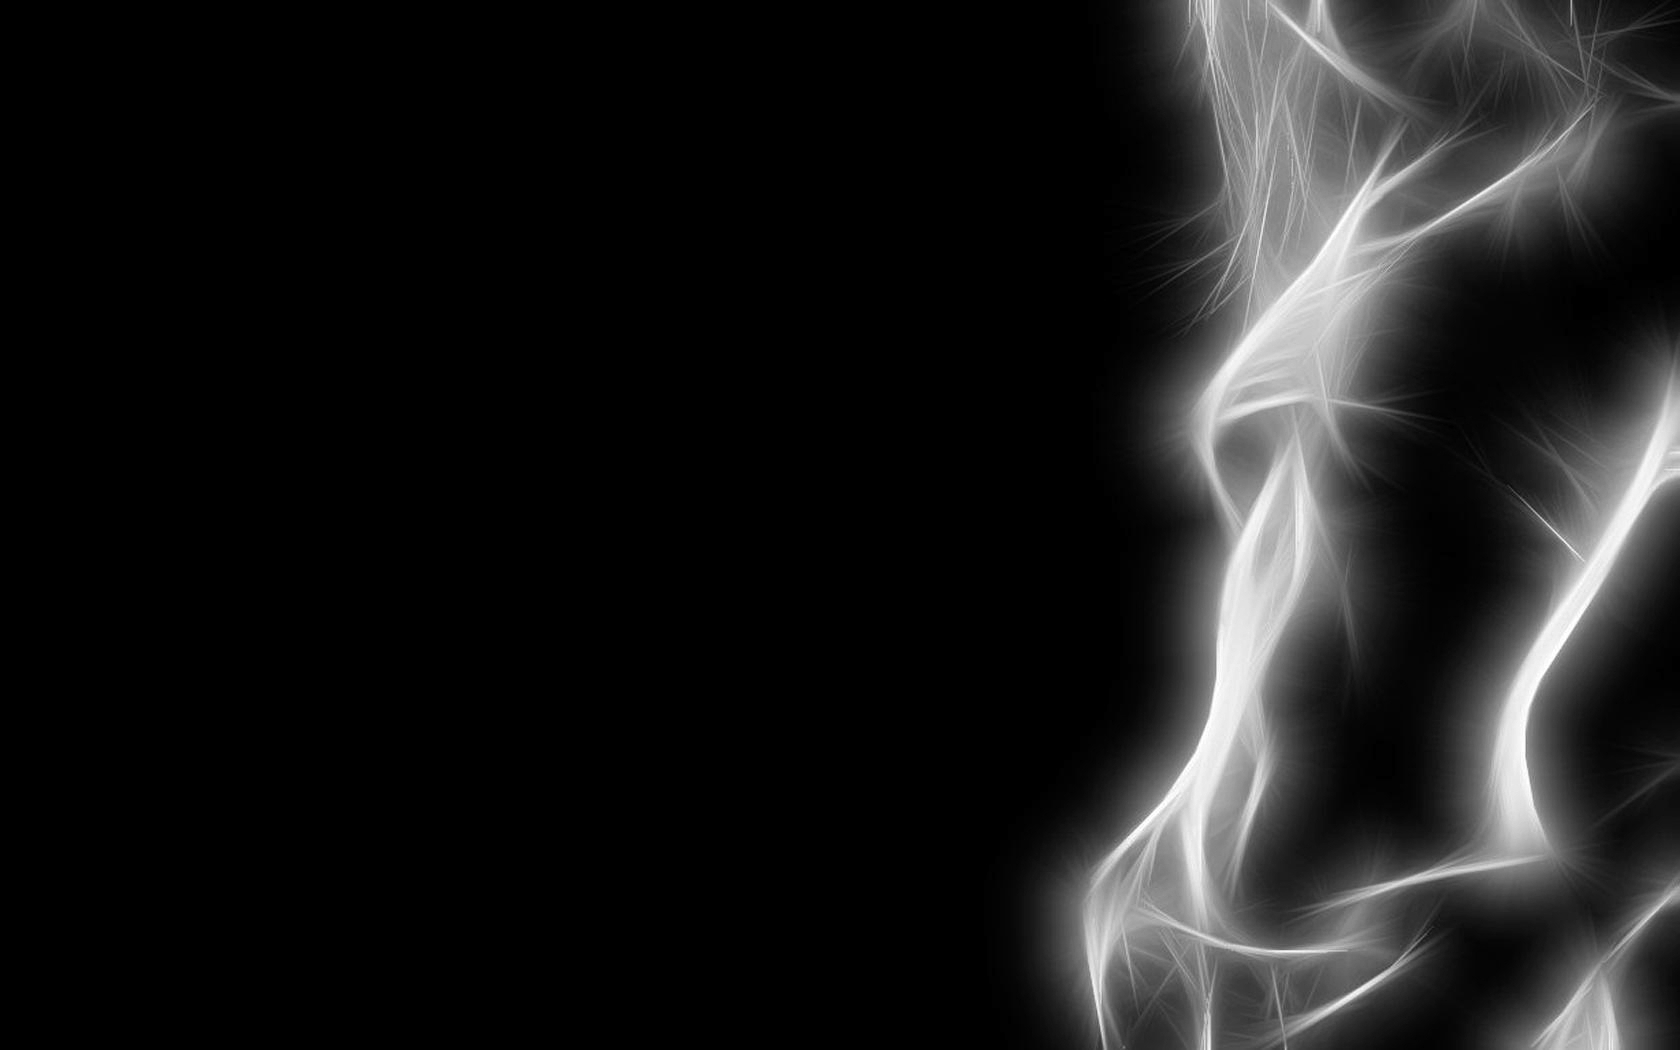 Dark And Awesome Black Themed Abstract HD Wallpaper Design